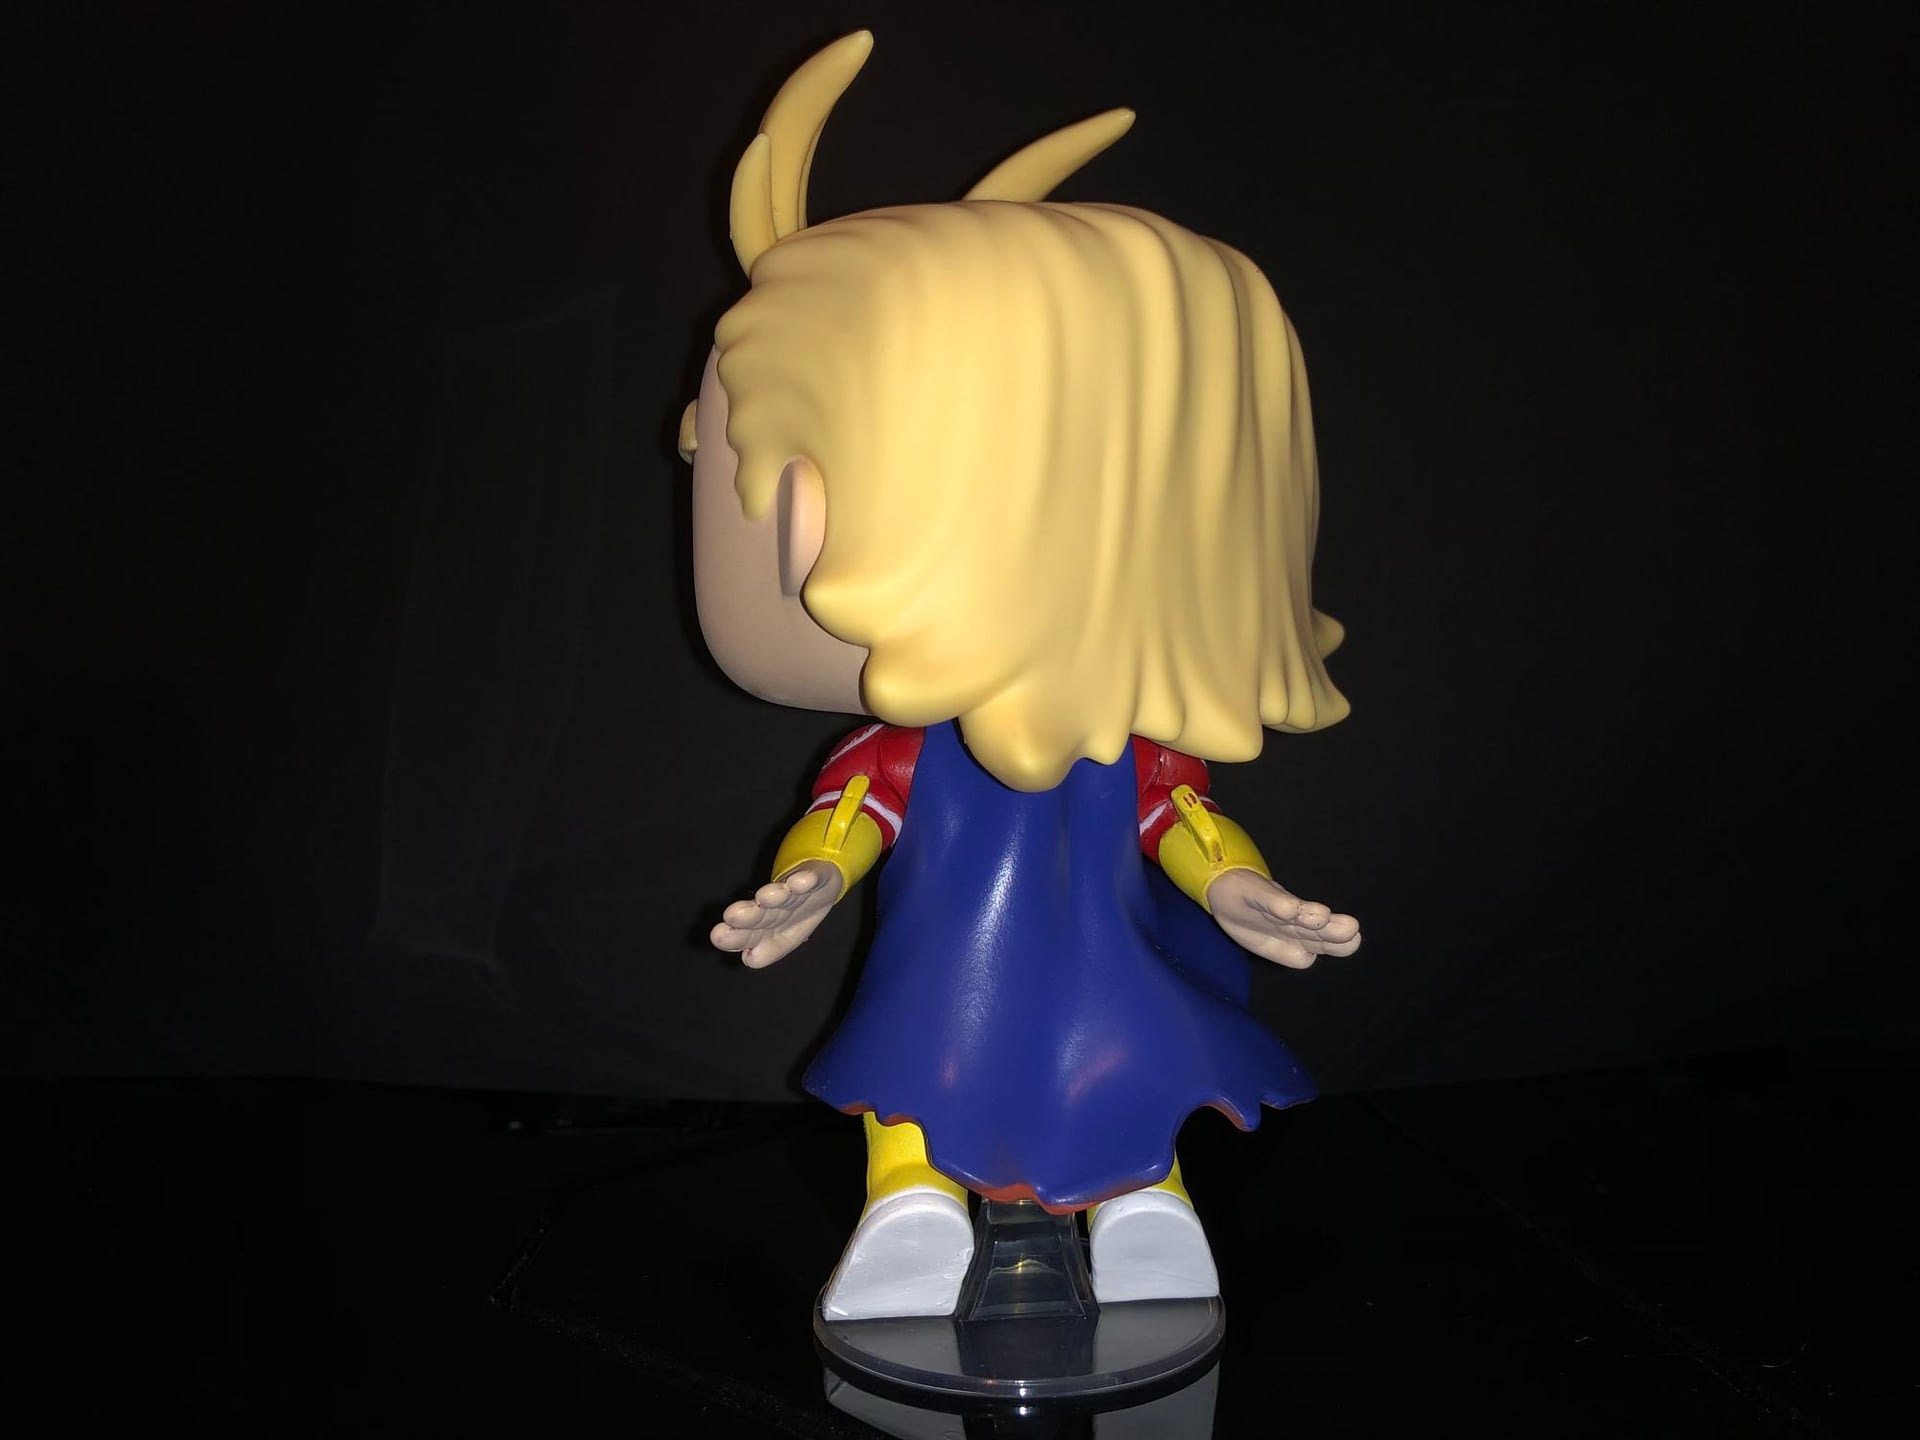 All Might Funko Pops Tell Us That They Are Here! [Review]